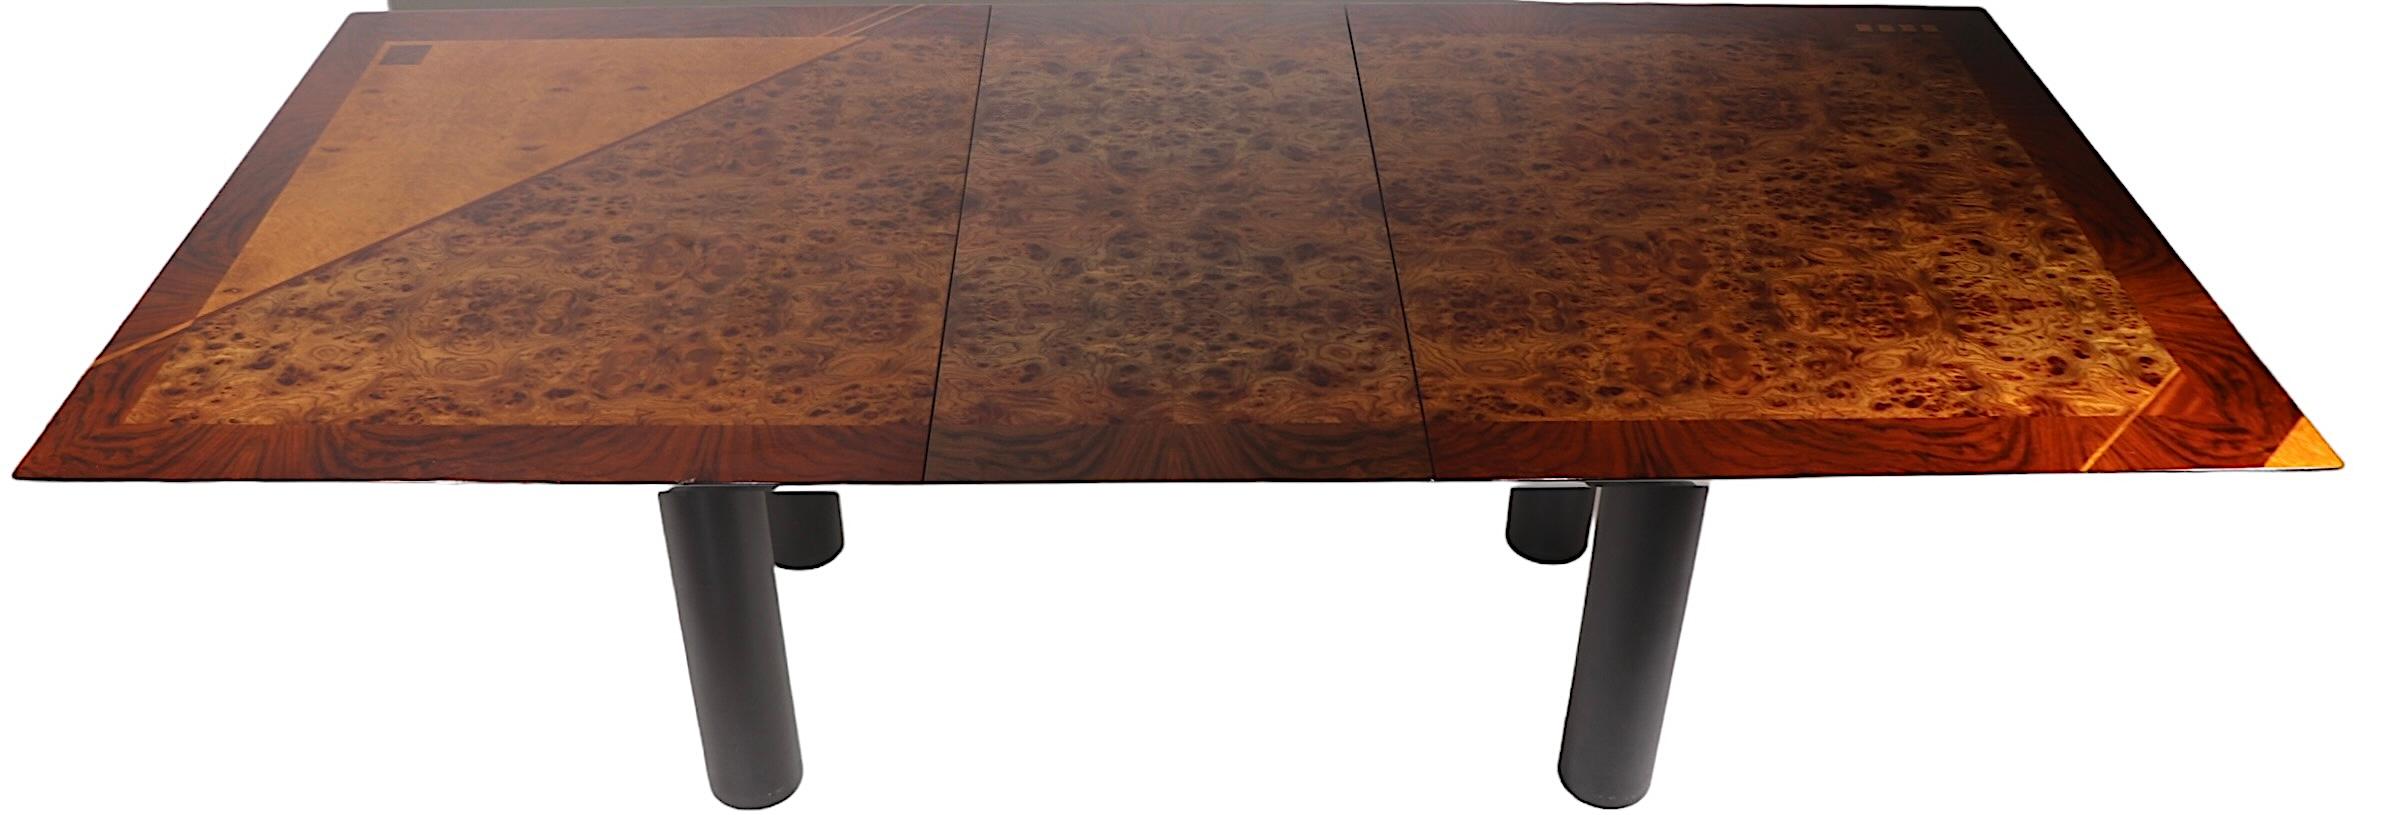 Italian Post Modern Dining Table by Oscar Dell Arredamento for Miniforms c 1970s For Sale 5